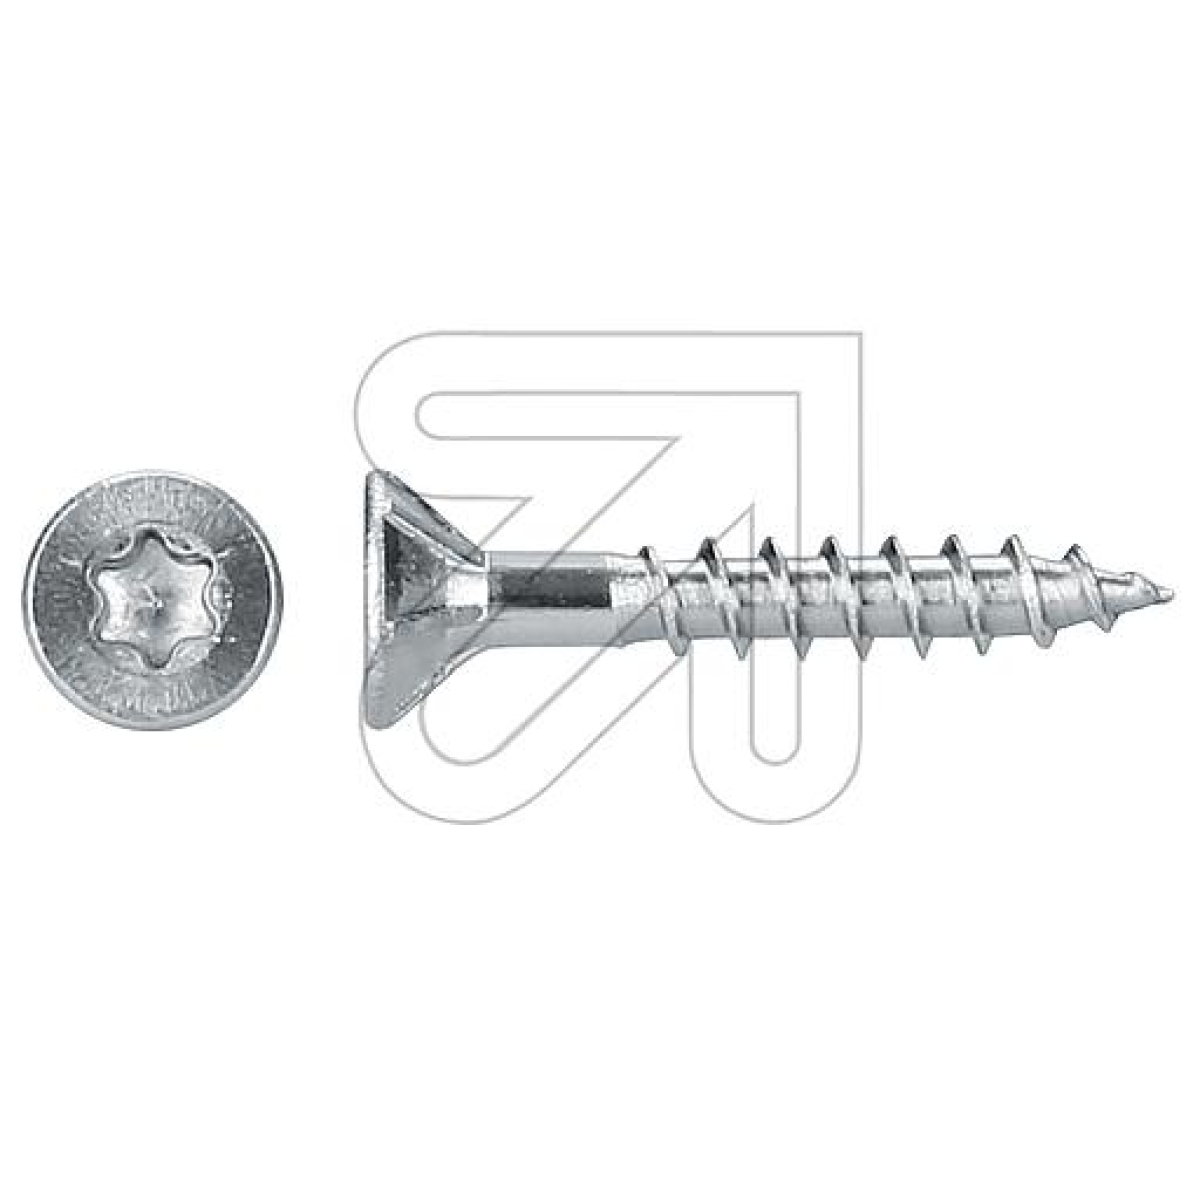 DresselhausJD-79 Countersunk chipboard screws T20 4.0x25 stainless steel A2-Price for 200 pcs.Article-No: 195955